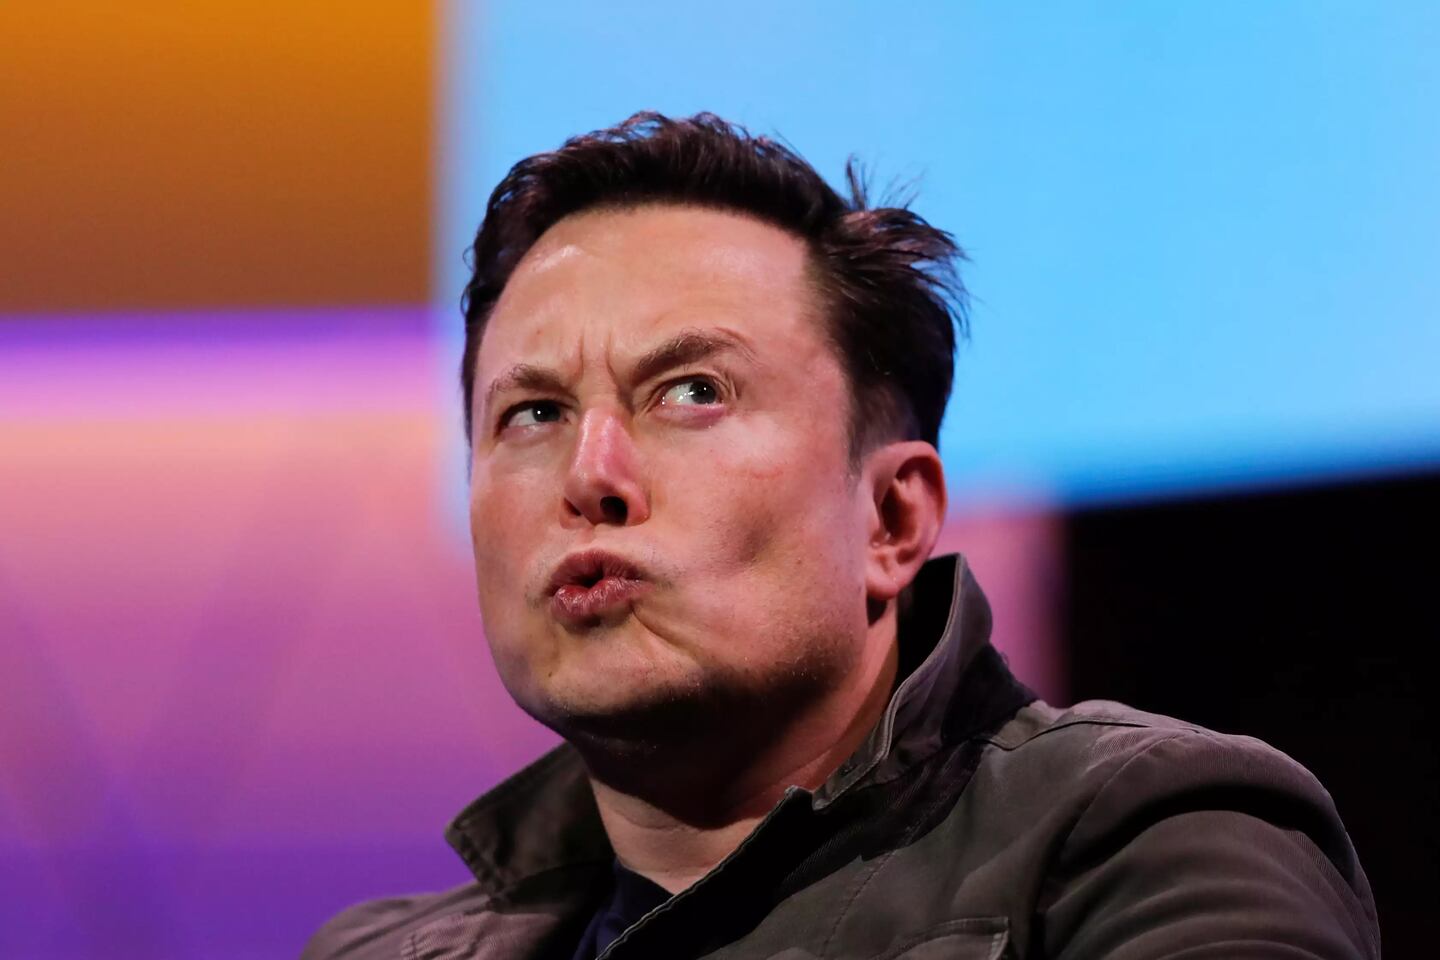 Elon Musk plans to close the Twitter purchase agreement on Friday: these are the milestones of the controversial purchase